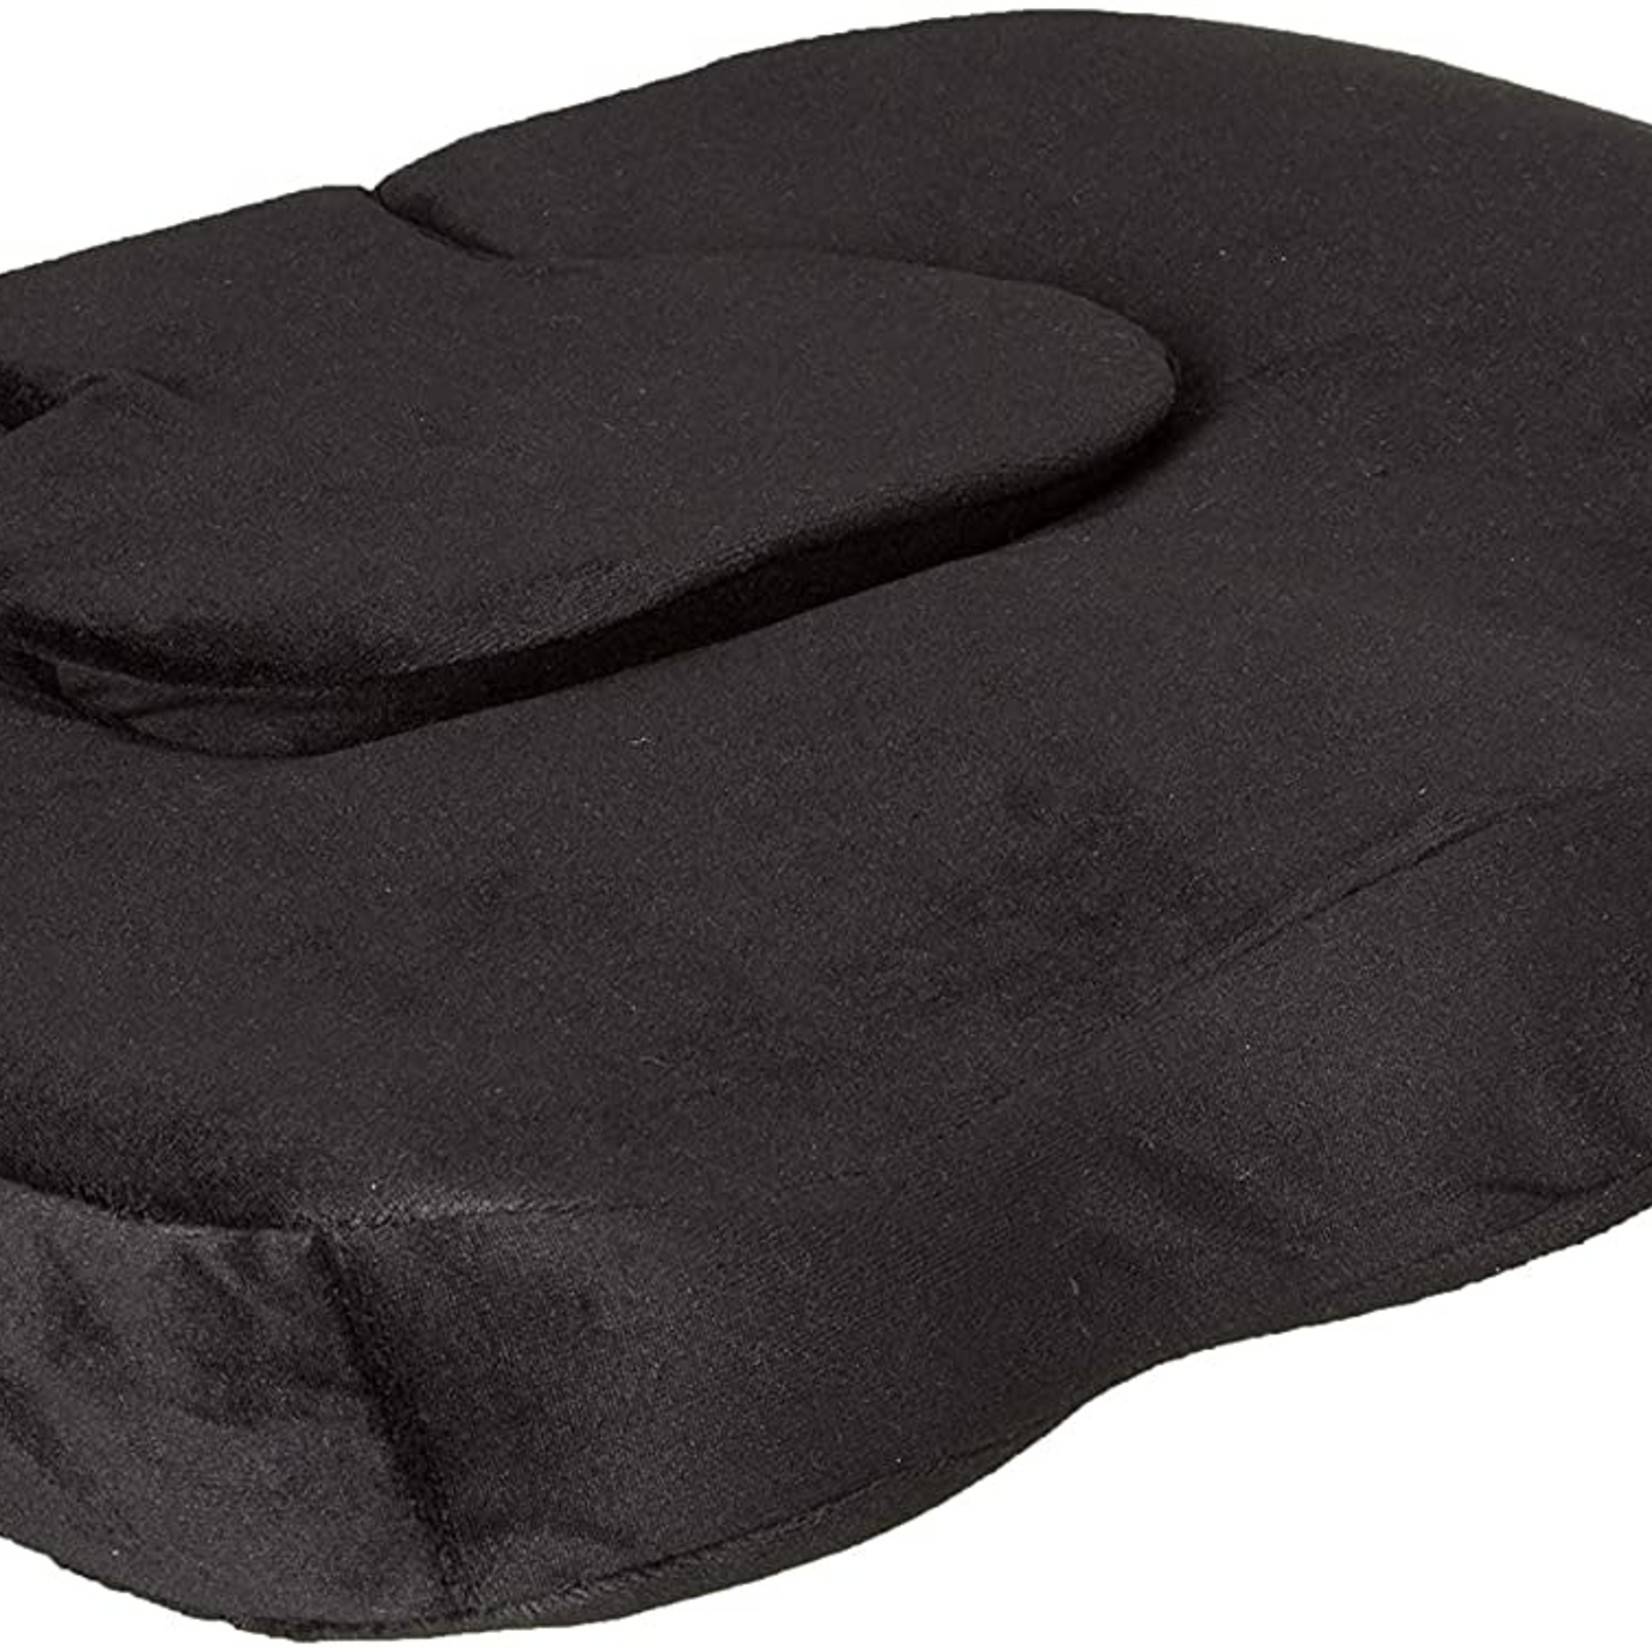 PCP Orthopaedic Seat Cushion with Removable Pad